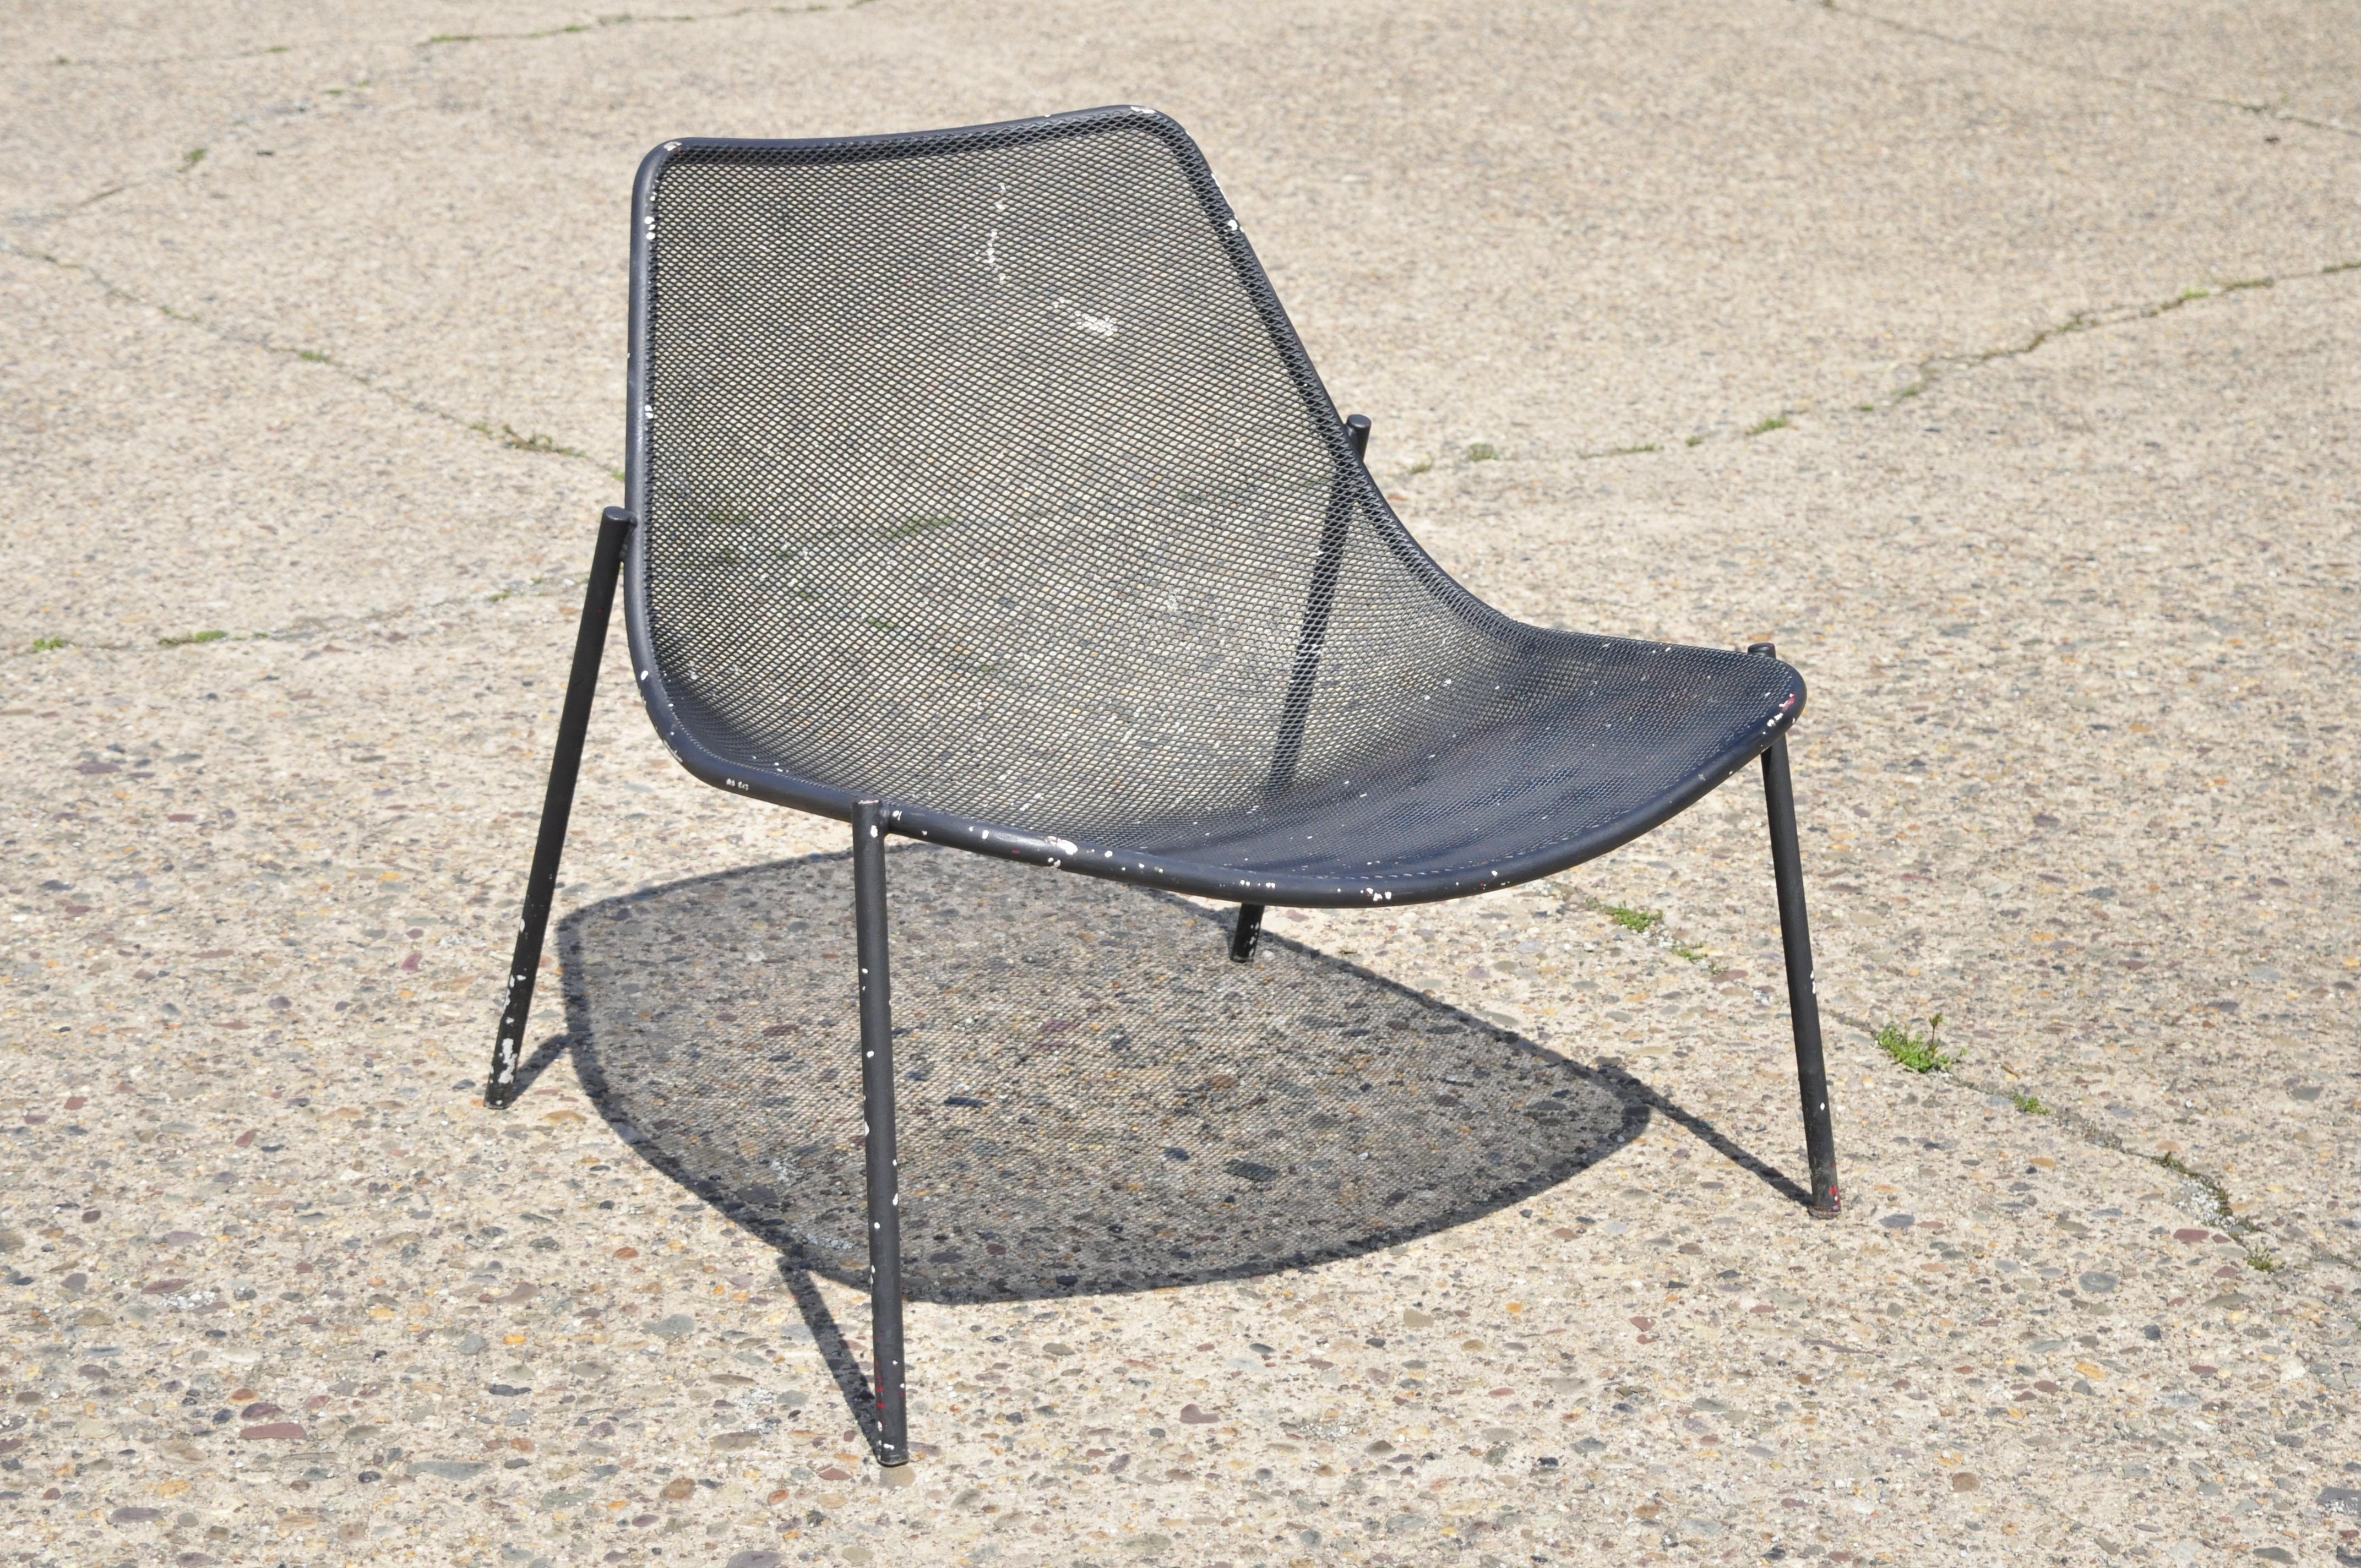 Vintage metal mesh perforated wide seat modern patio garden lounge chair. Item features large wide seat, metal mesh frame, clean modernist lines, great style and form. Circa late 20th century. Measurements: 33